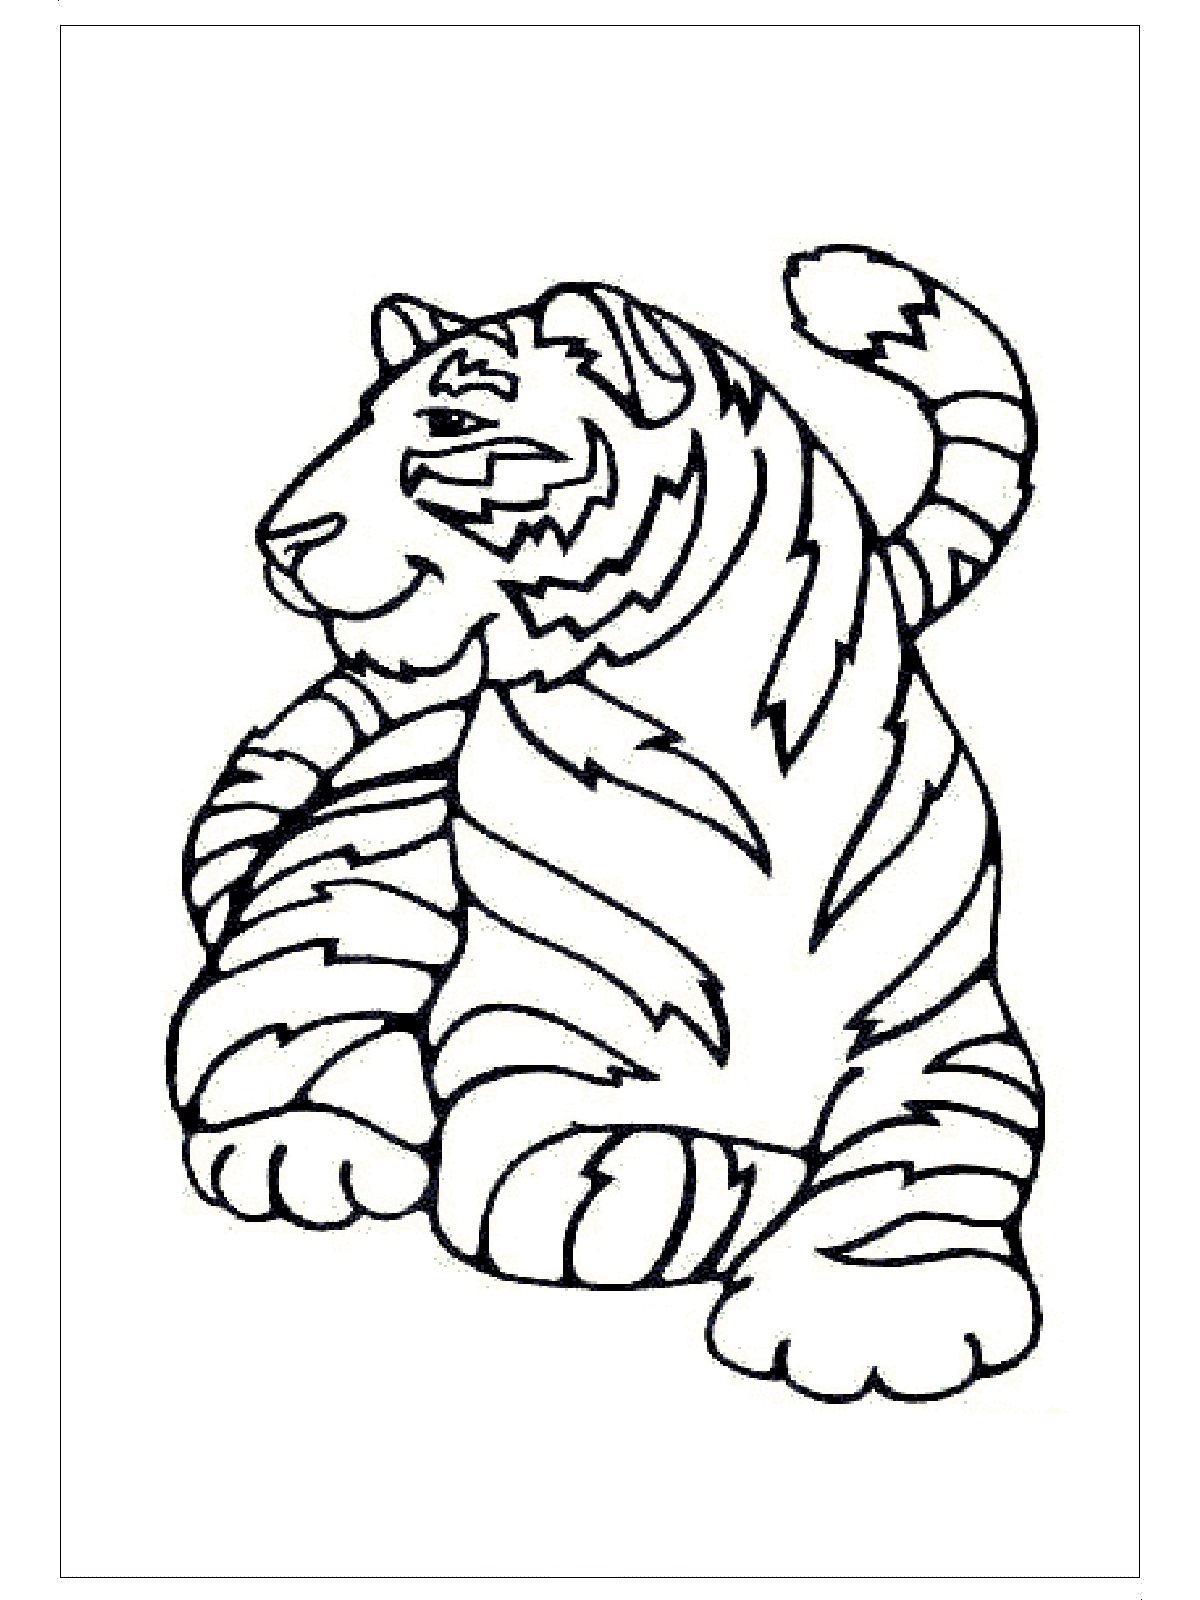 Tiger Coloring Pages for Kids - Preschool and Kindergarten